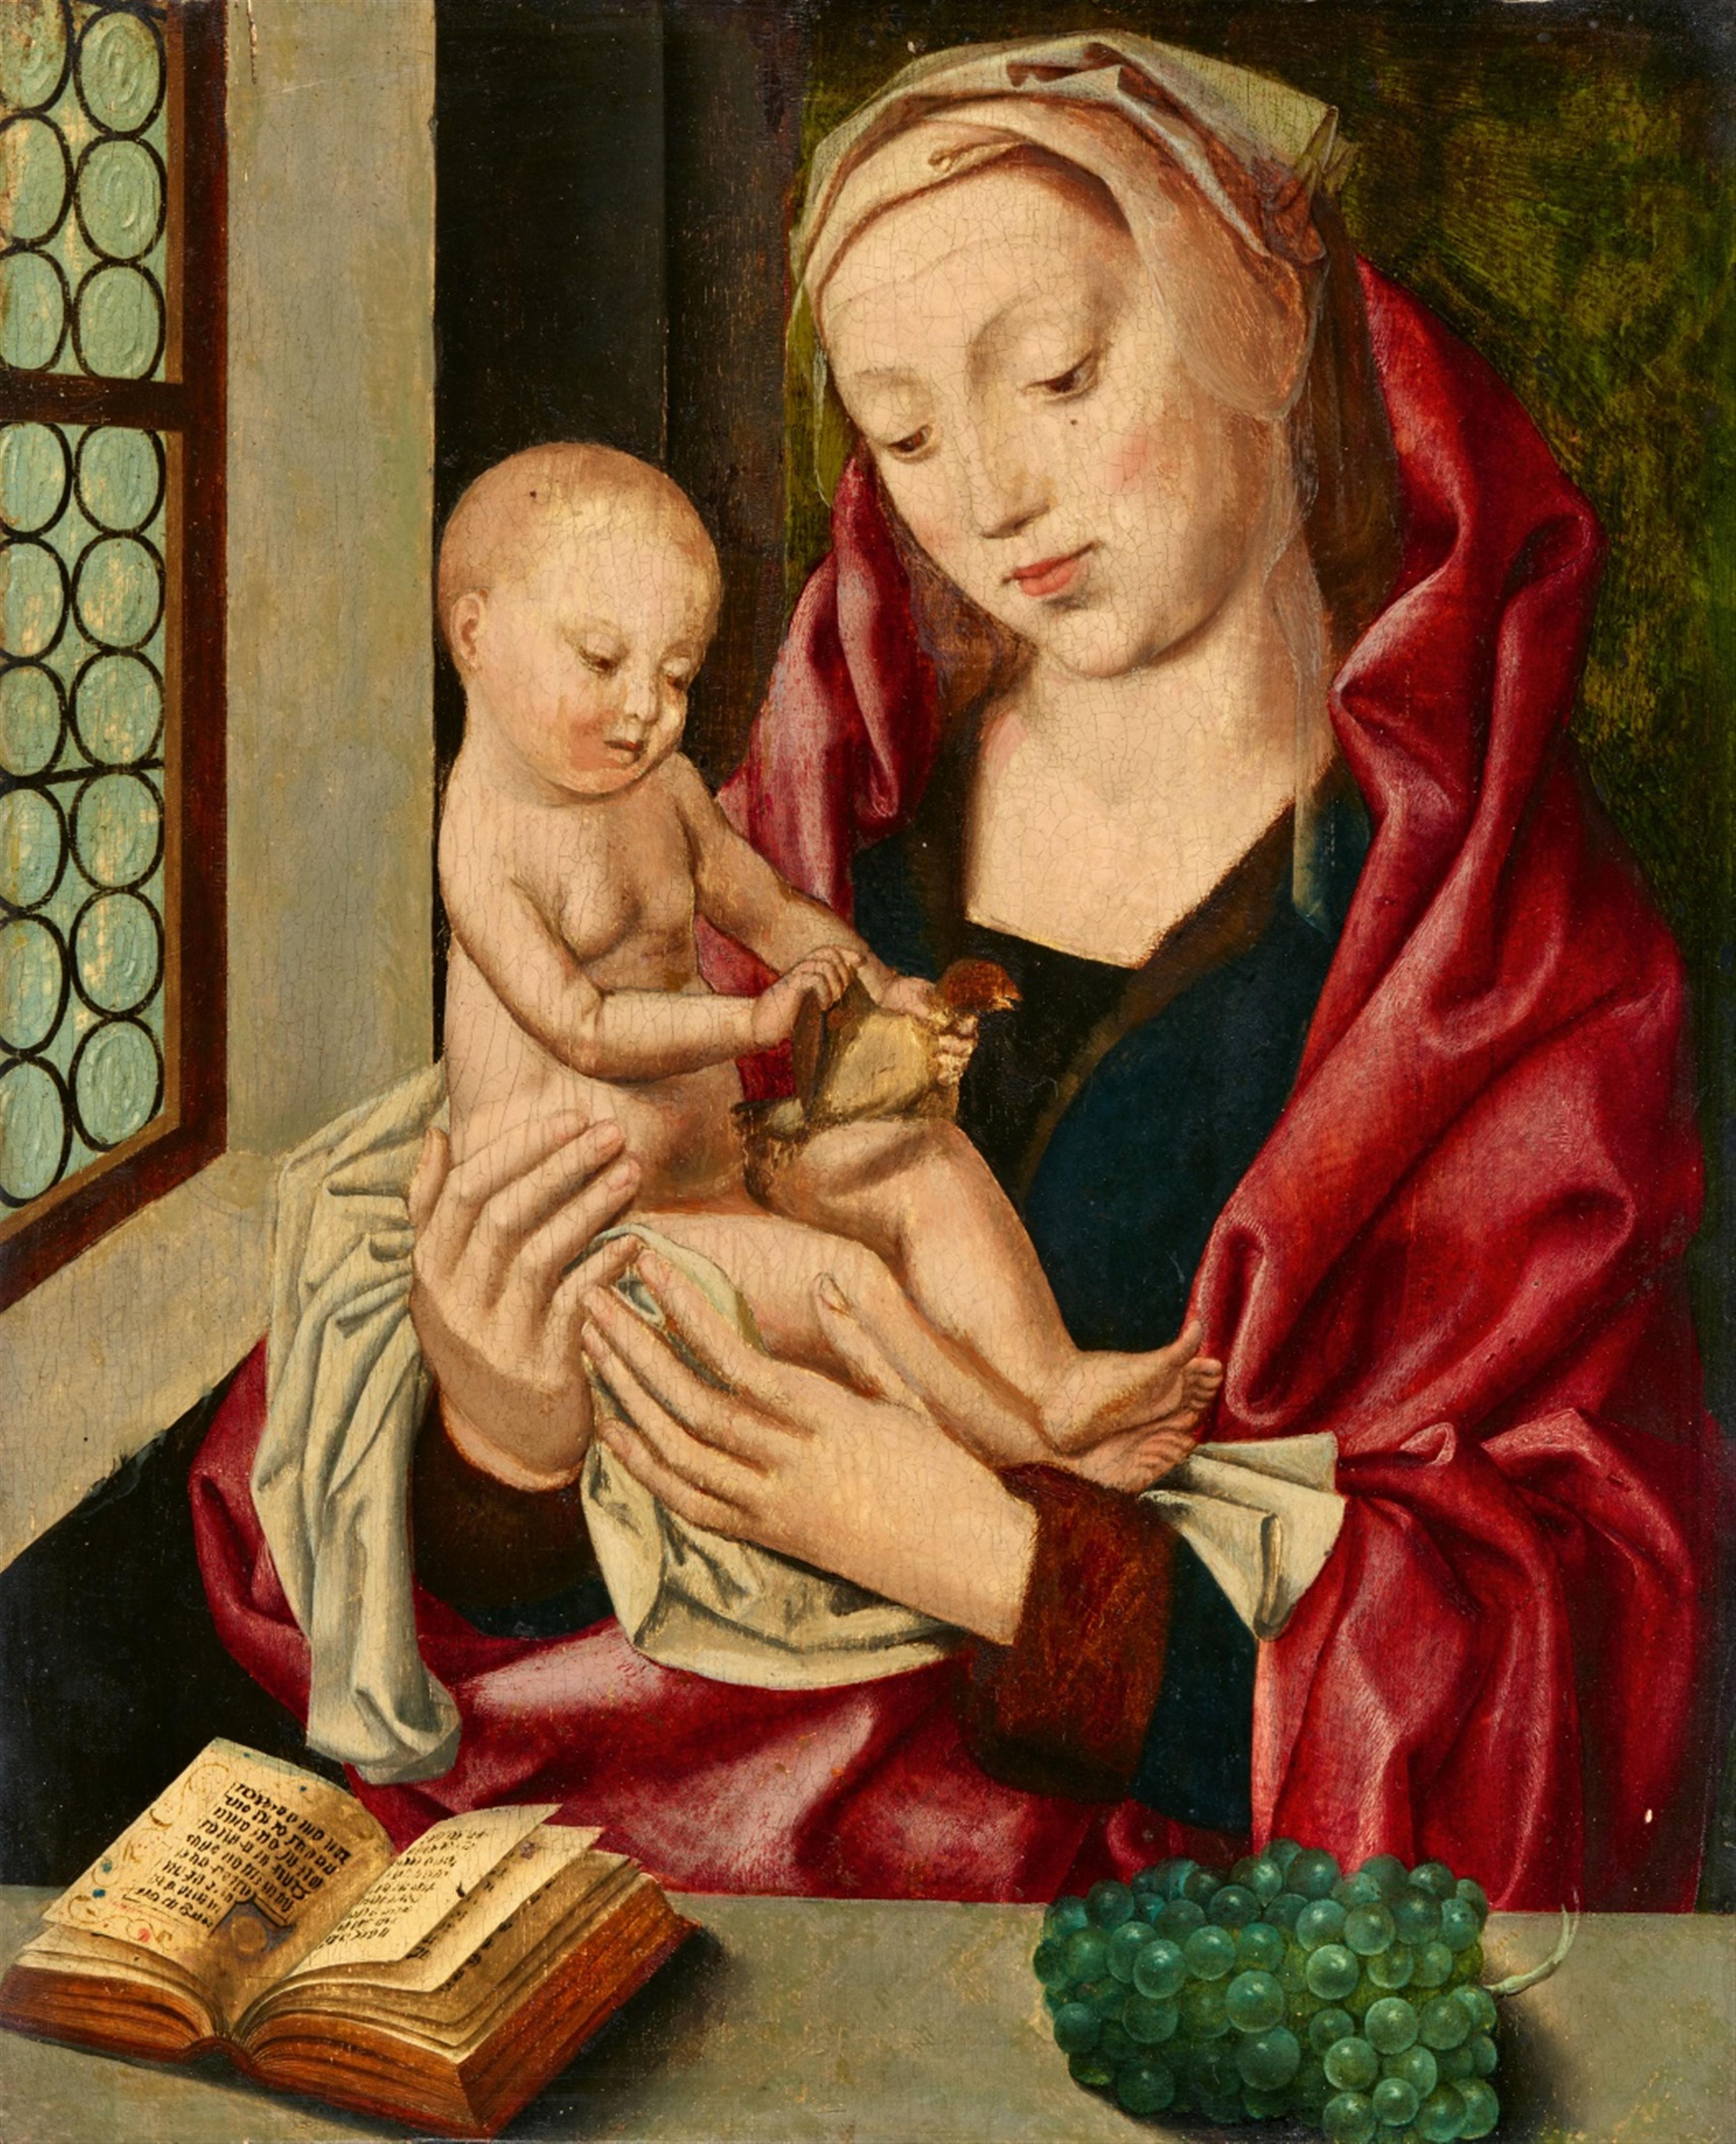 German or Netherlandish School early 16th century - The Virgin in an Interior with an Open Book - image-1